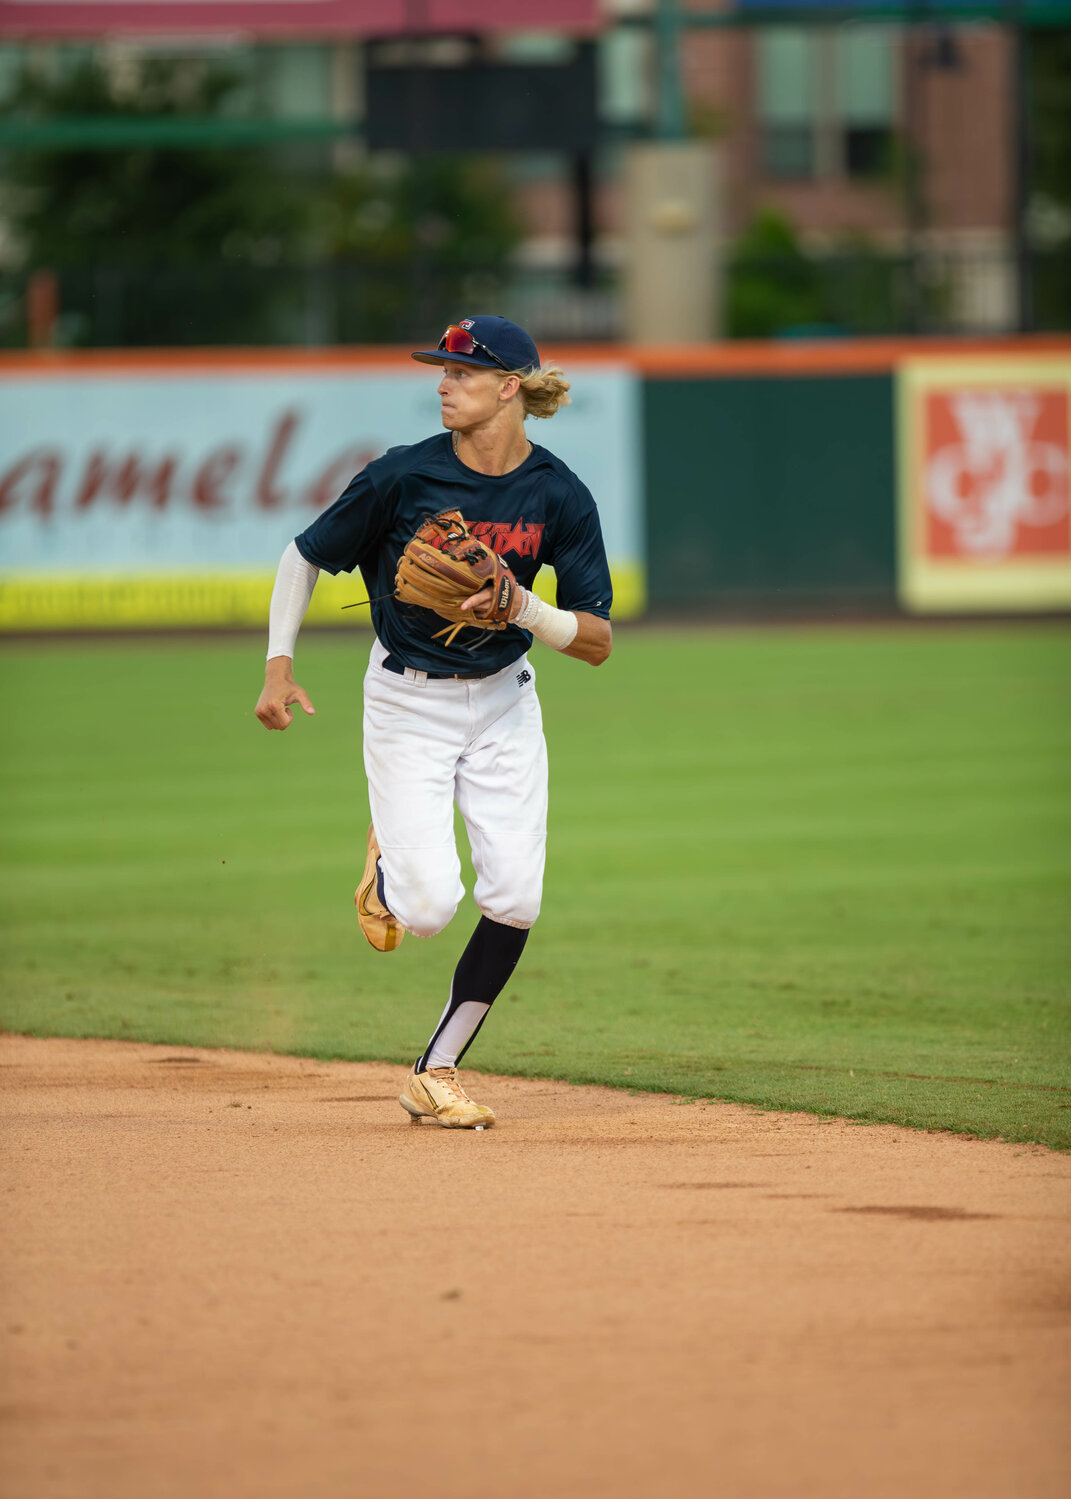 Drew Markle chases after a grounder during the GHBCA Seniors All-Star game at Constellation Field in Sugar Land.